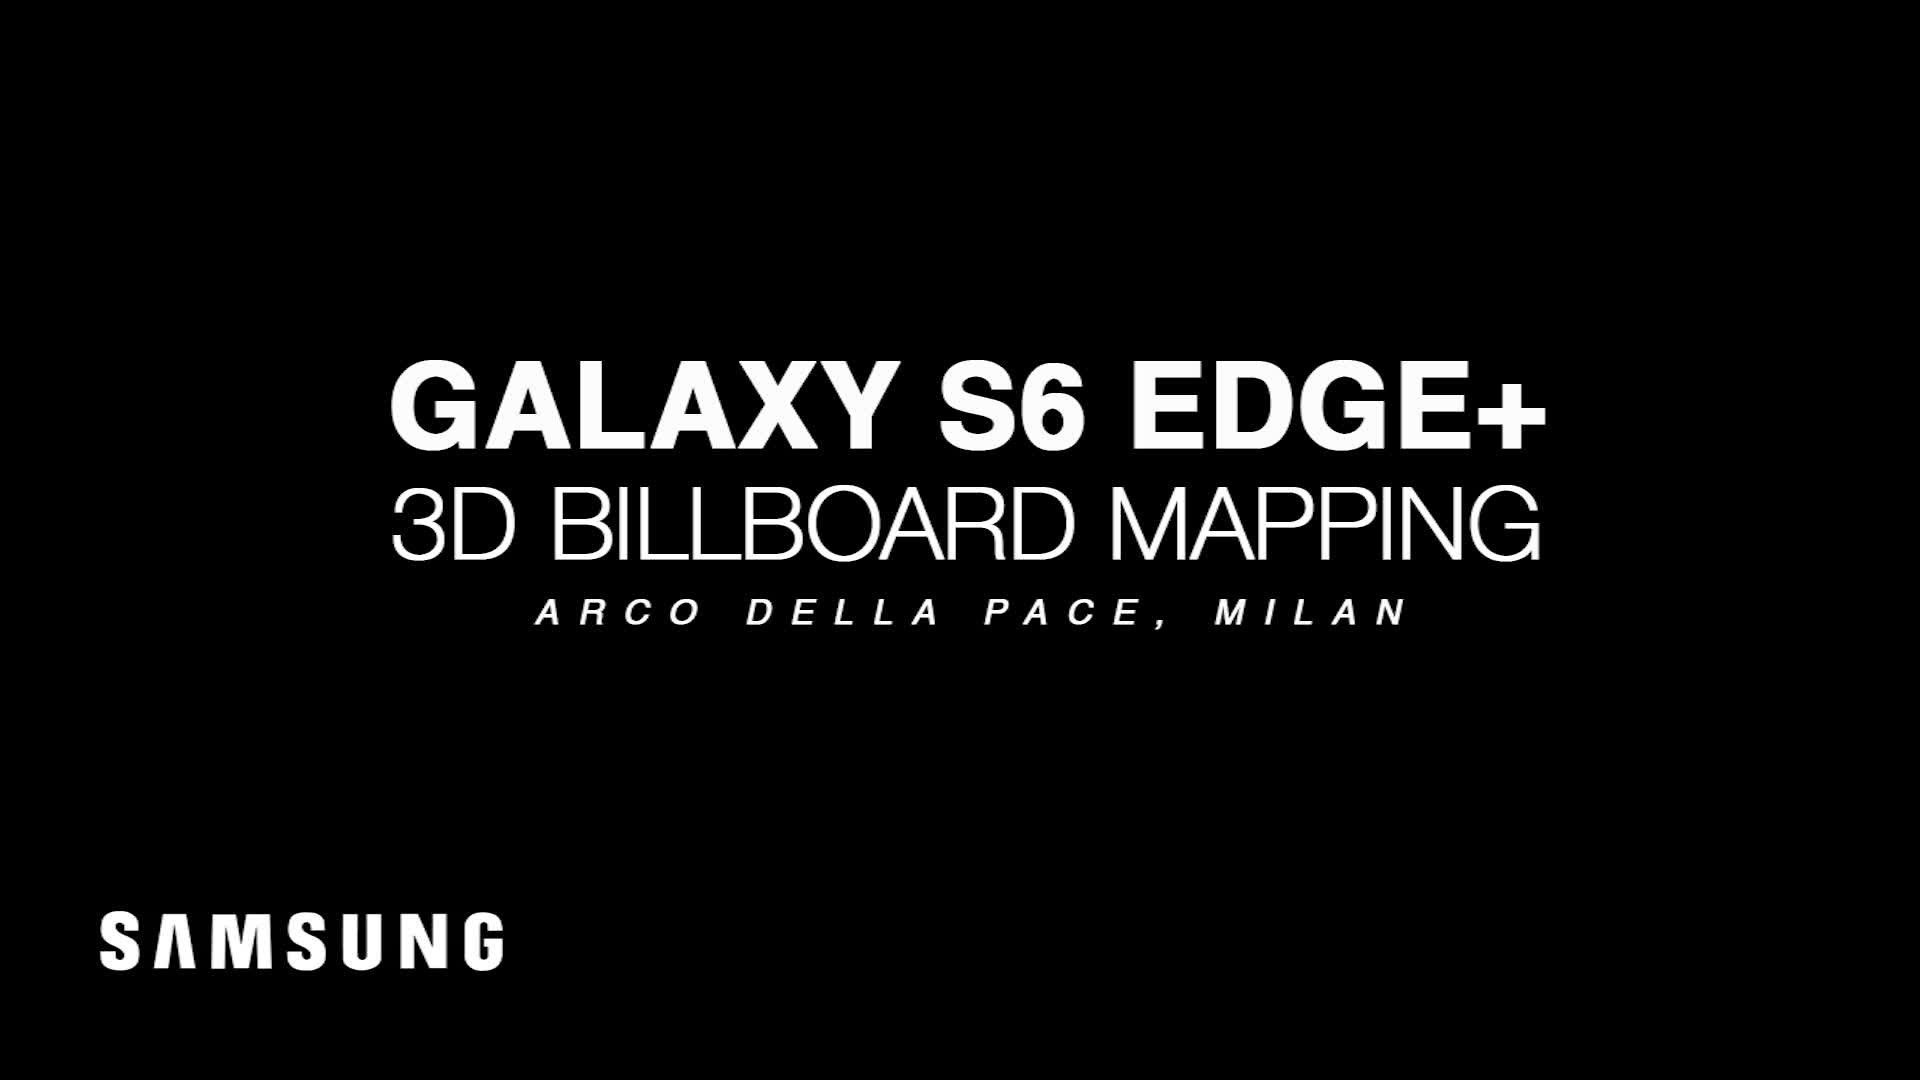 Samsung billboard mapping project, Milan - Live Experience